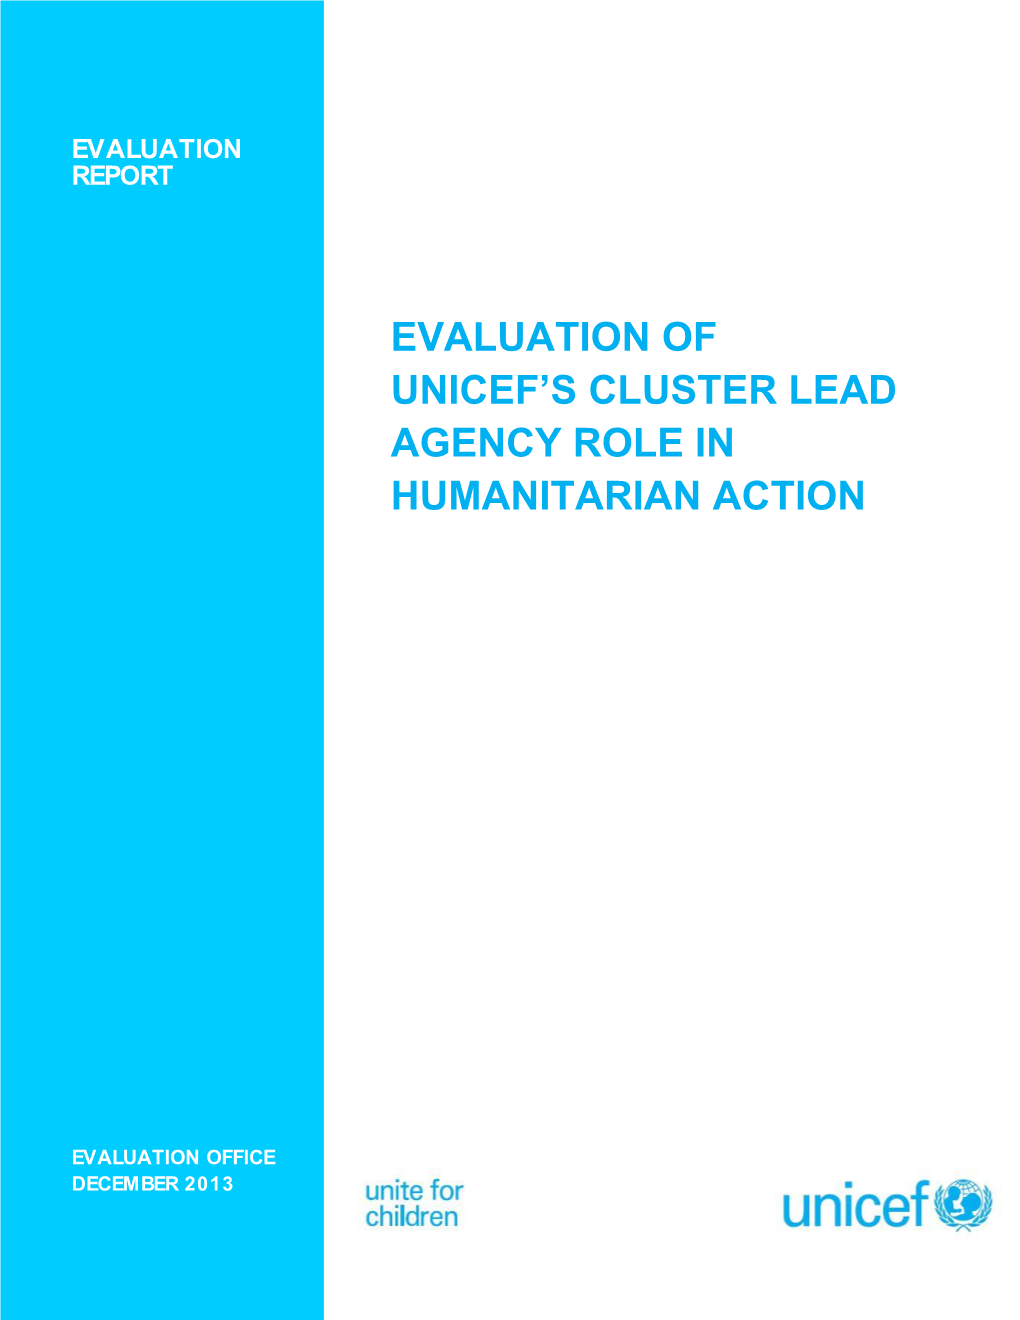 Evaluation of Unicef's Cluster Lead